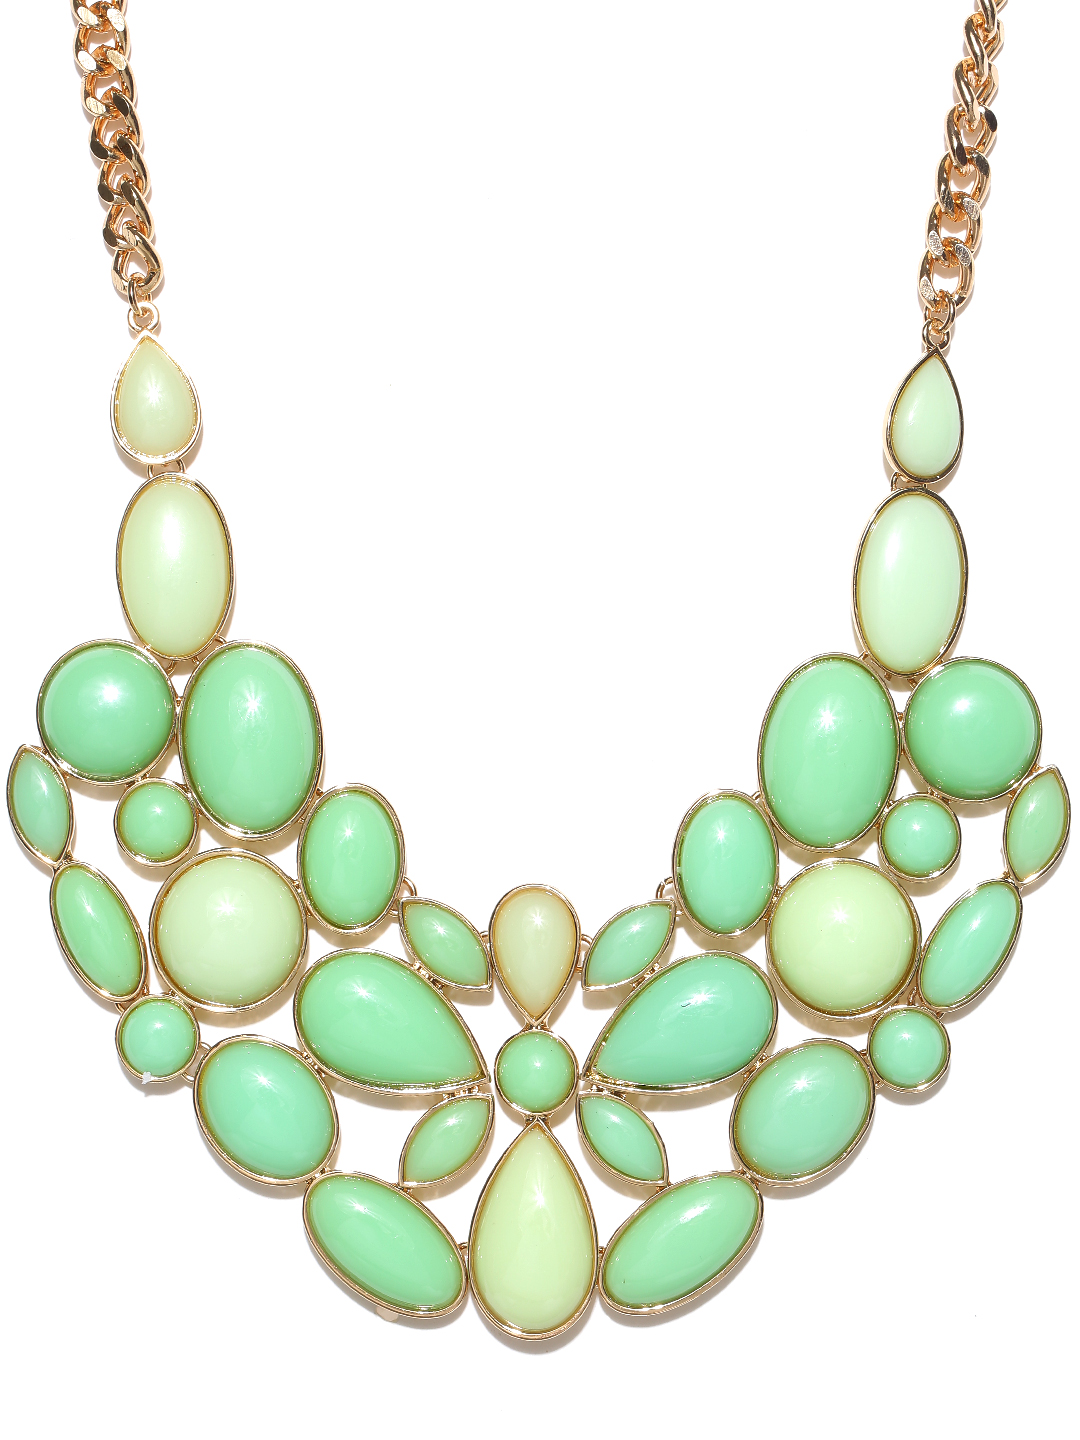 FOREVER 21 Green Stone-Studded Statement Necklace